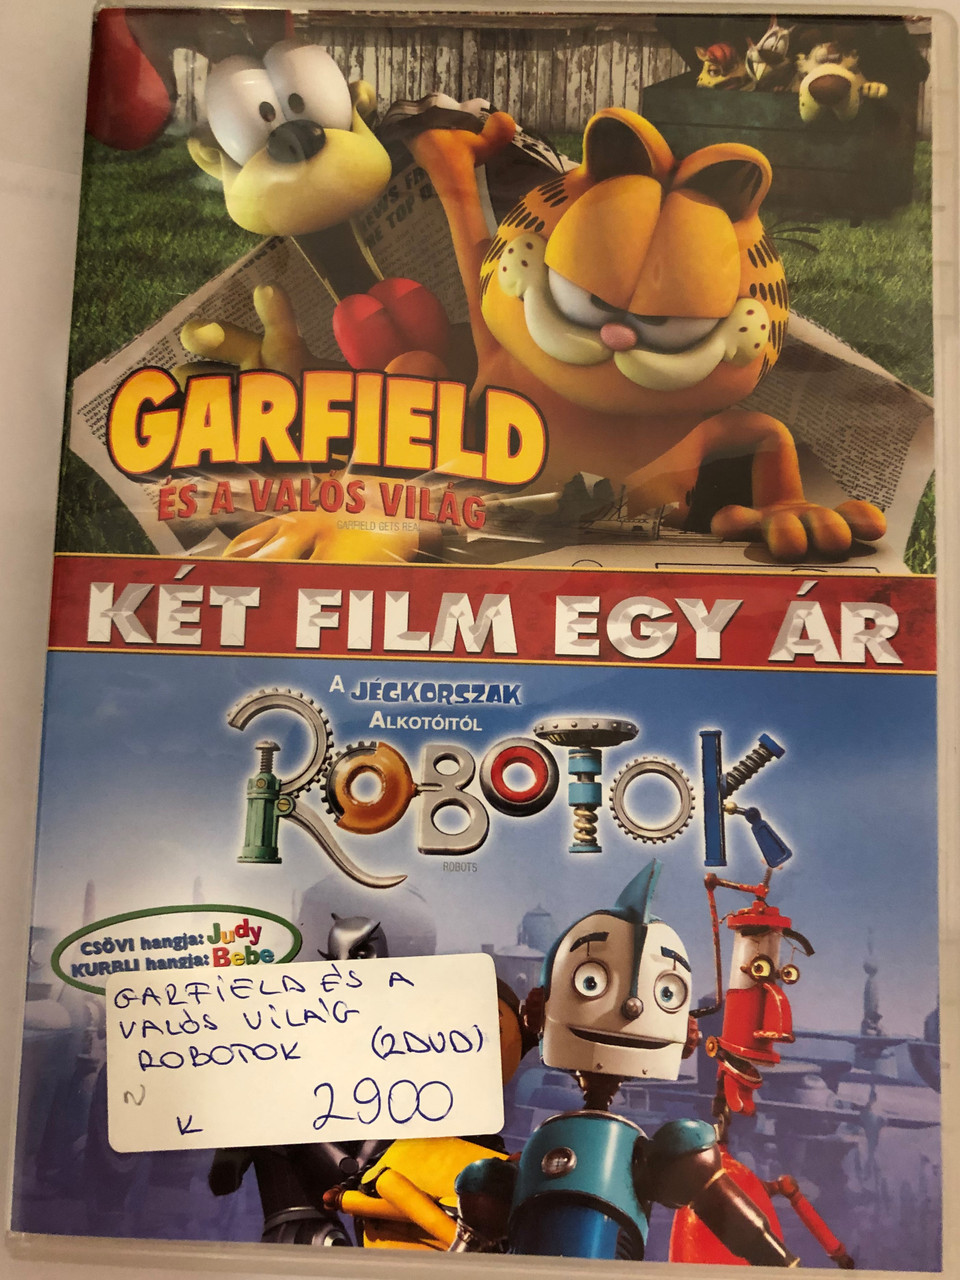 Garfield Gets Real 2007 - Robots 2005 DVD / Directed by Mark A. Z. Dippé,  Kyung Ho Lee - Chris